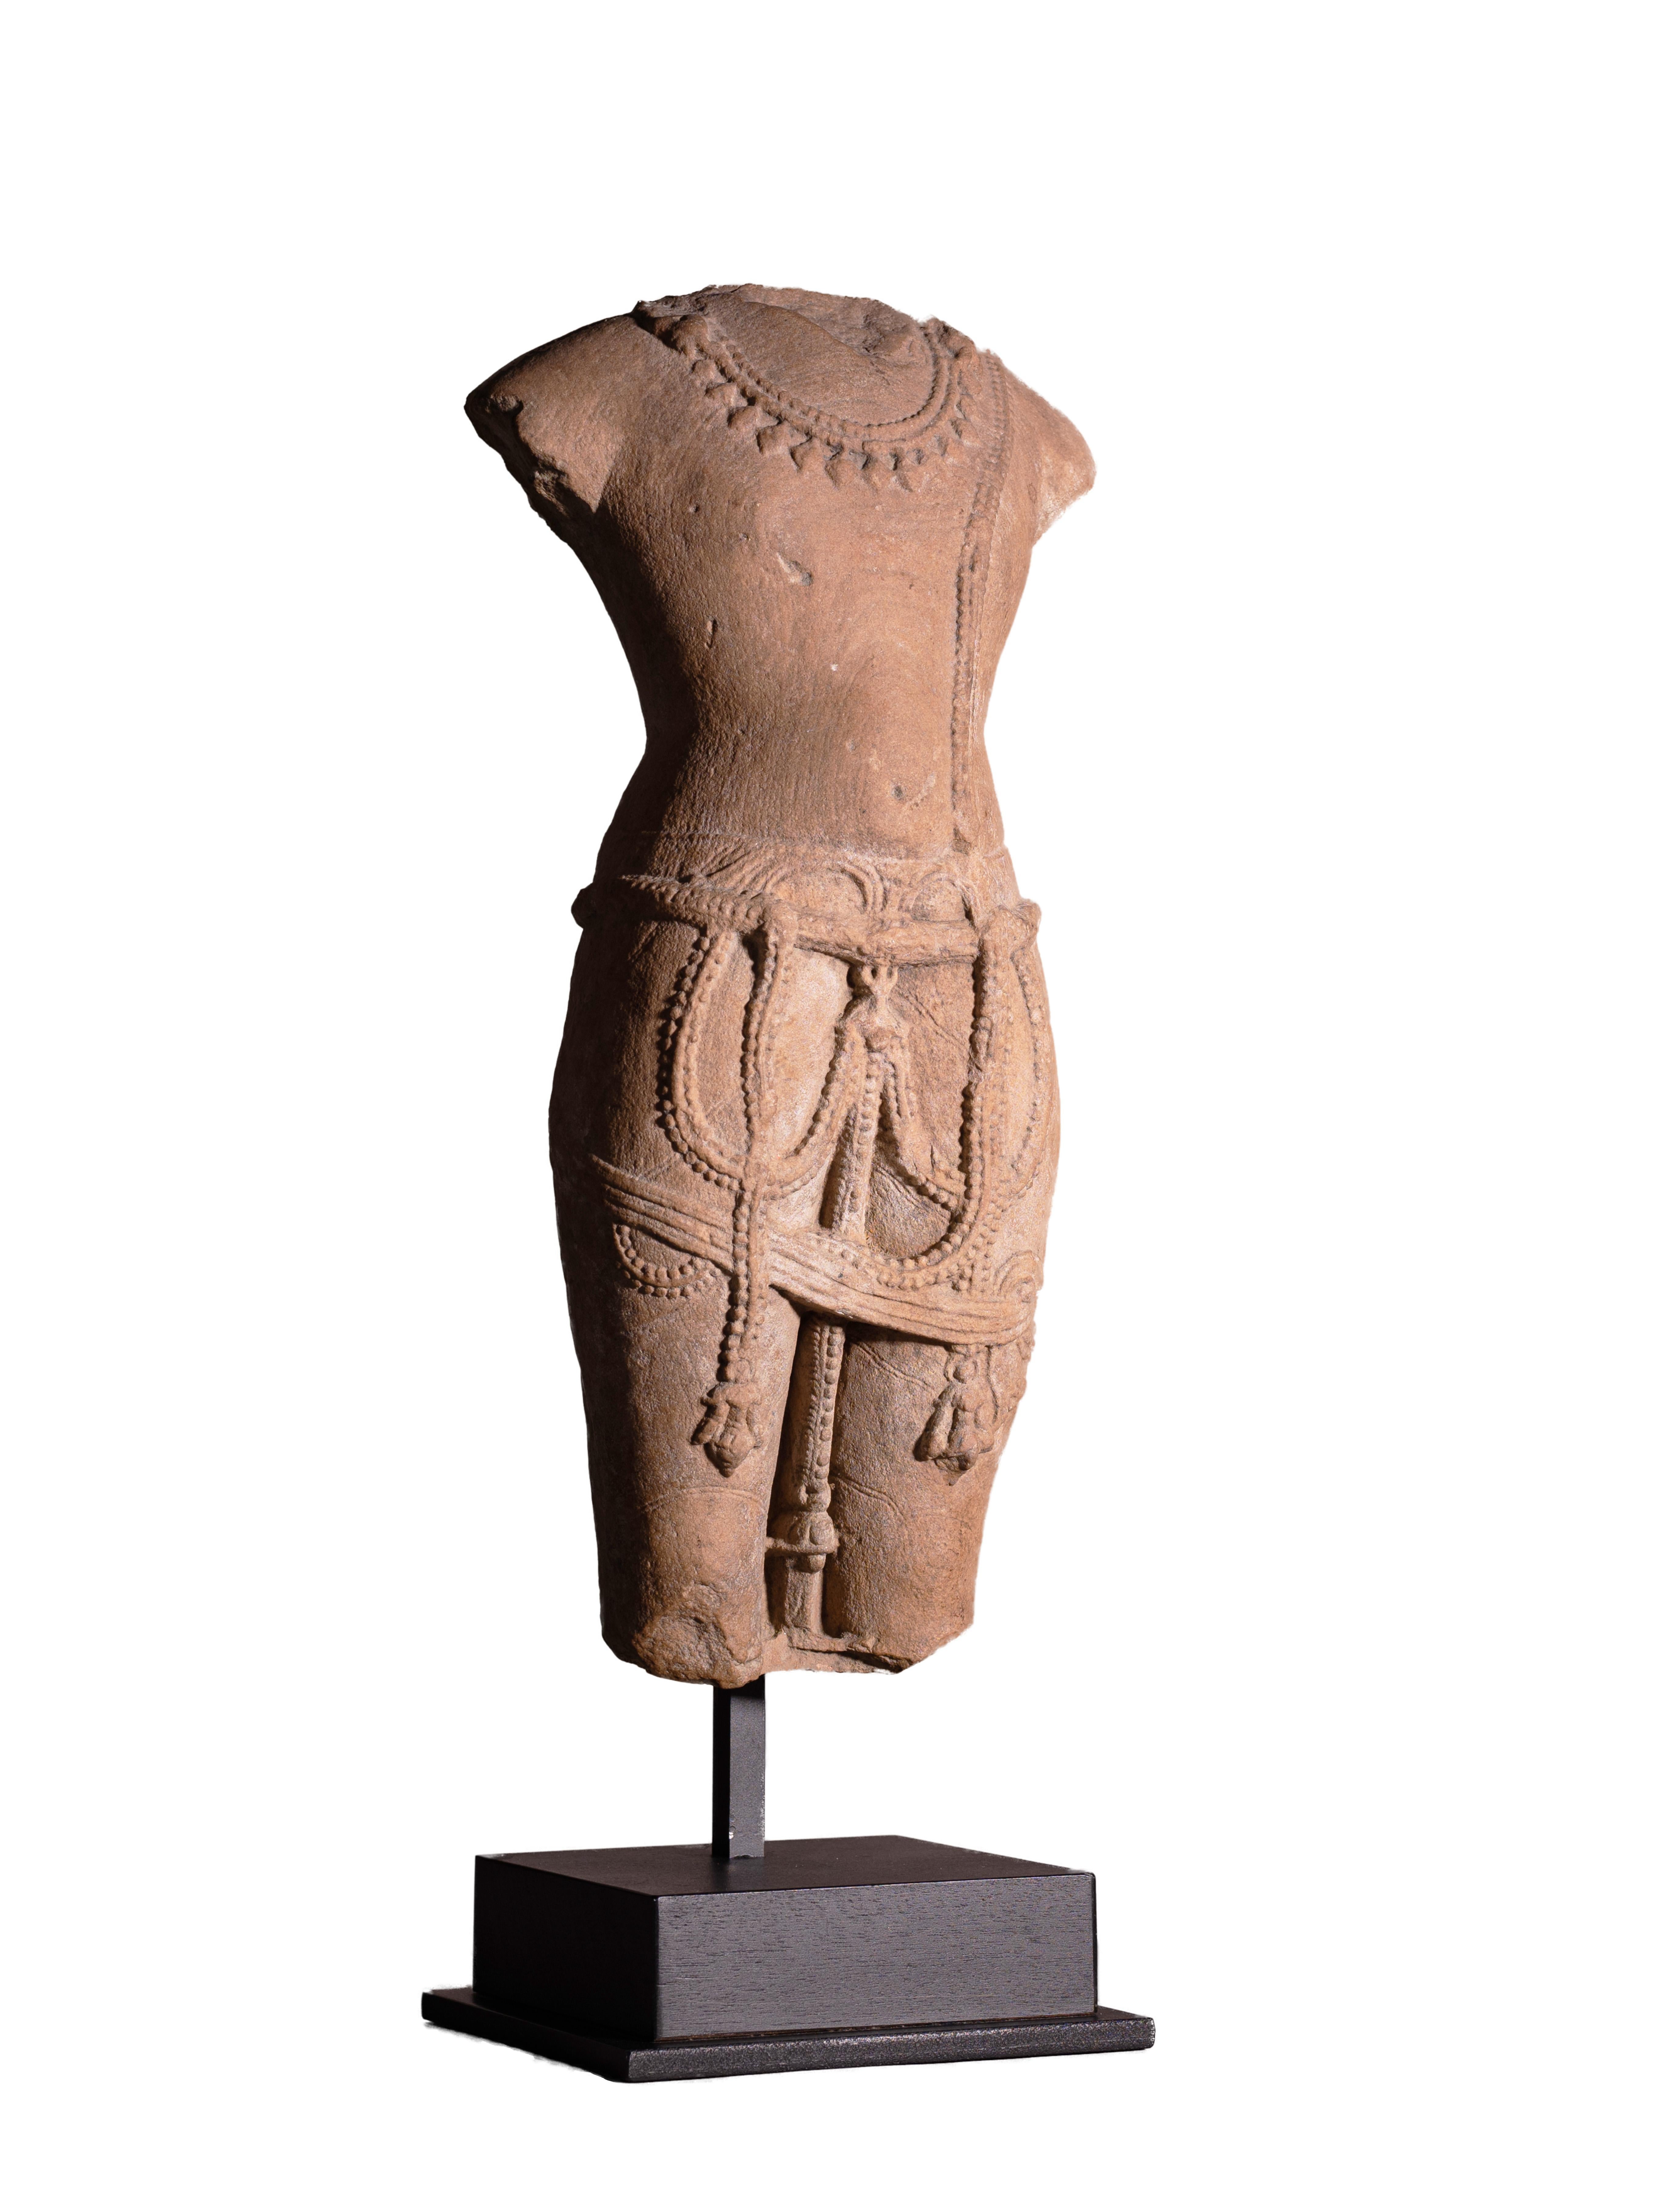 A Pink-beige Sandstone Torso of a Male Deity, likely Vishnu from Uttar Pradesh state in India, circa 10-11th century.

The figure is deeply carved and quite sensuous with pronounced curves which fits well with an idealized depiction of a Male deity